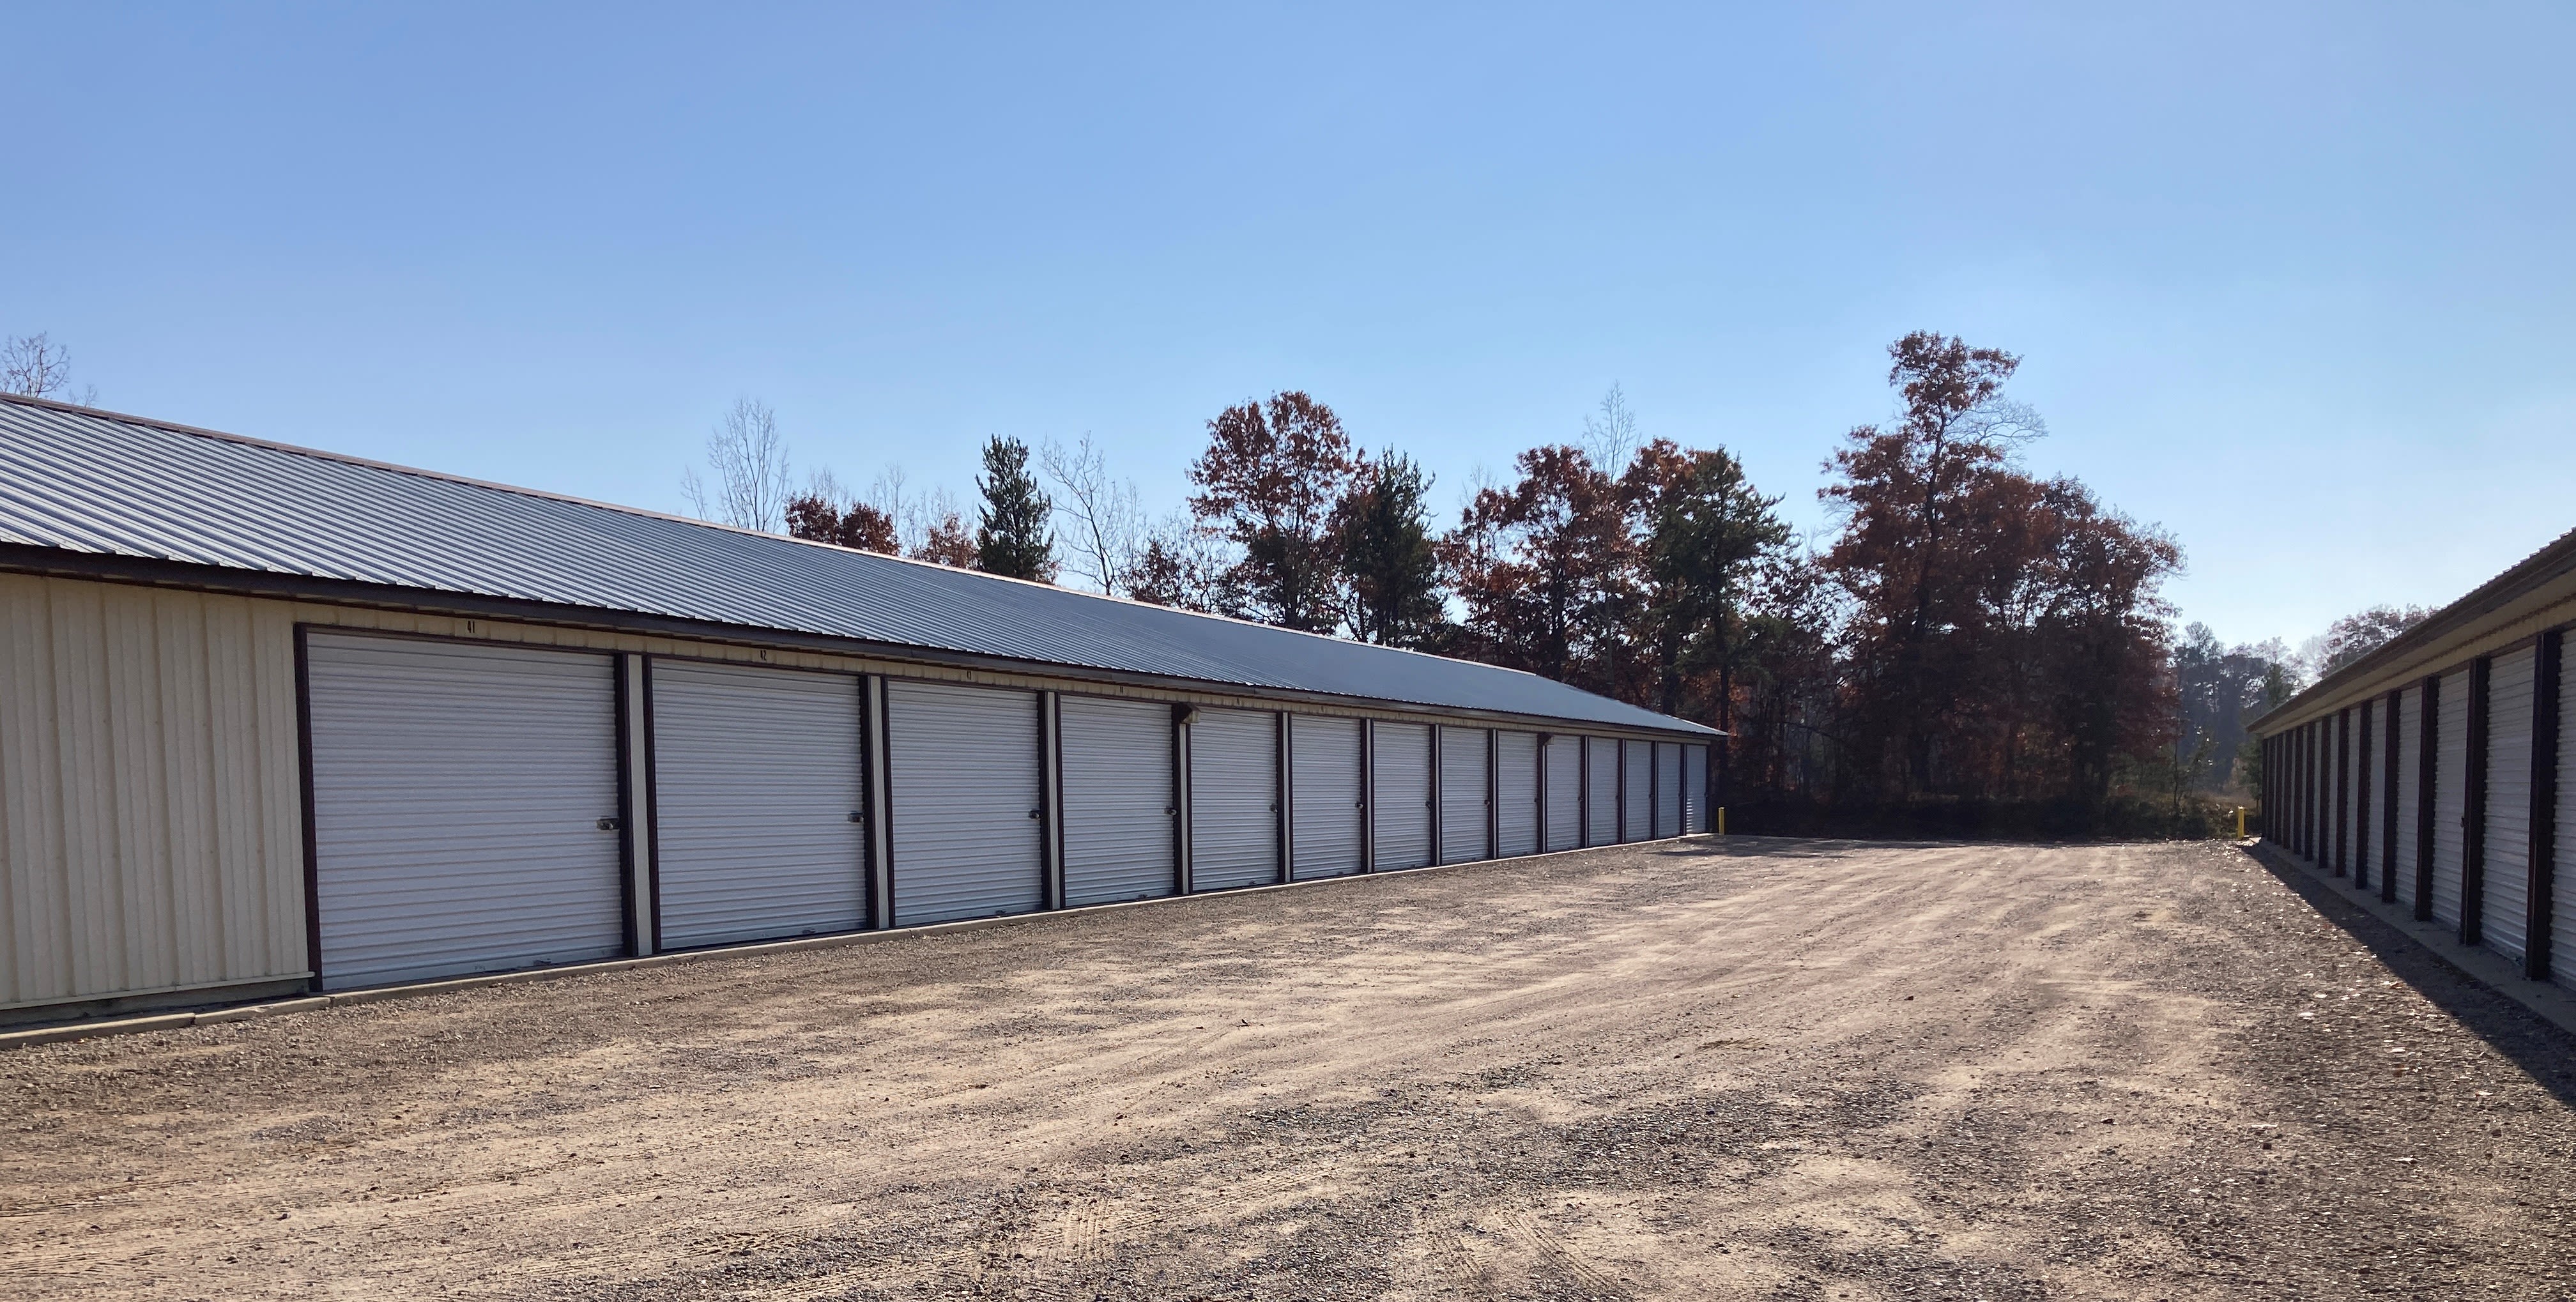 Unit sizes and prices at KO Storage of Baxter in Baxter, Minnesota